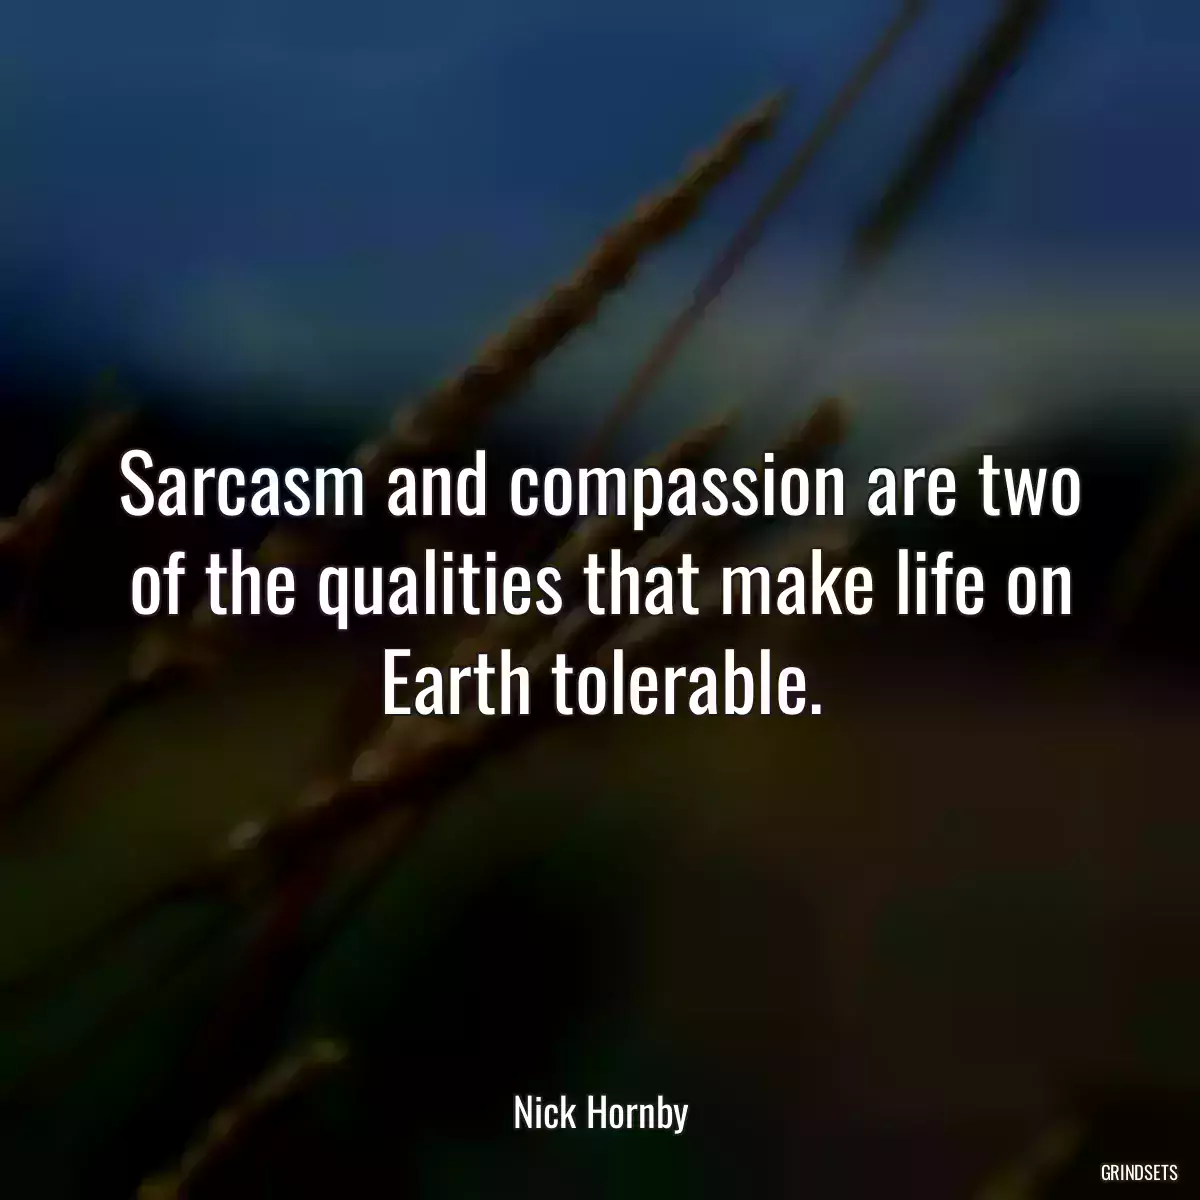 Sarcasm and compassion are two of the qualities that make life on Earth tolerable.